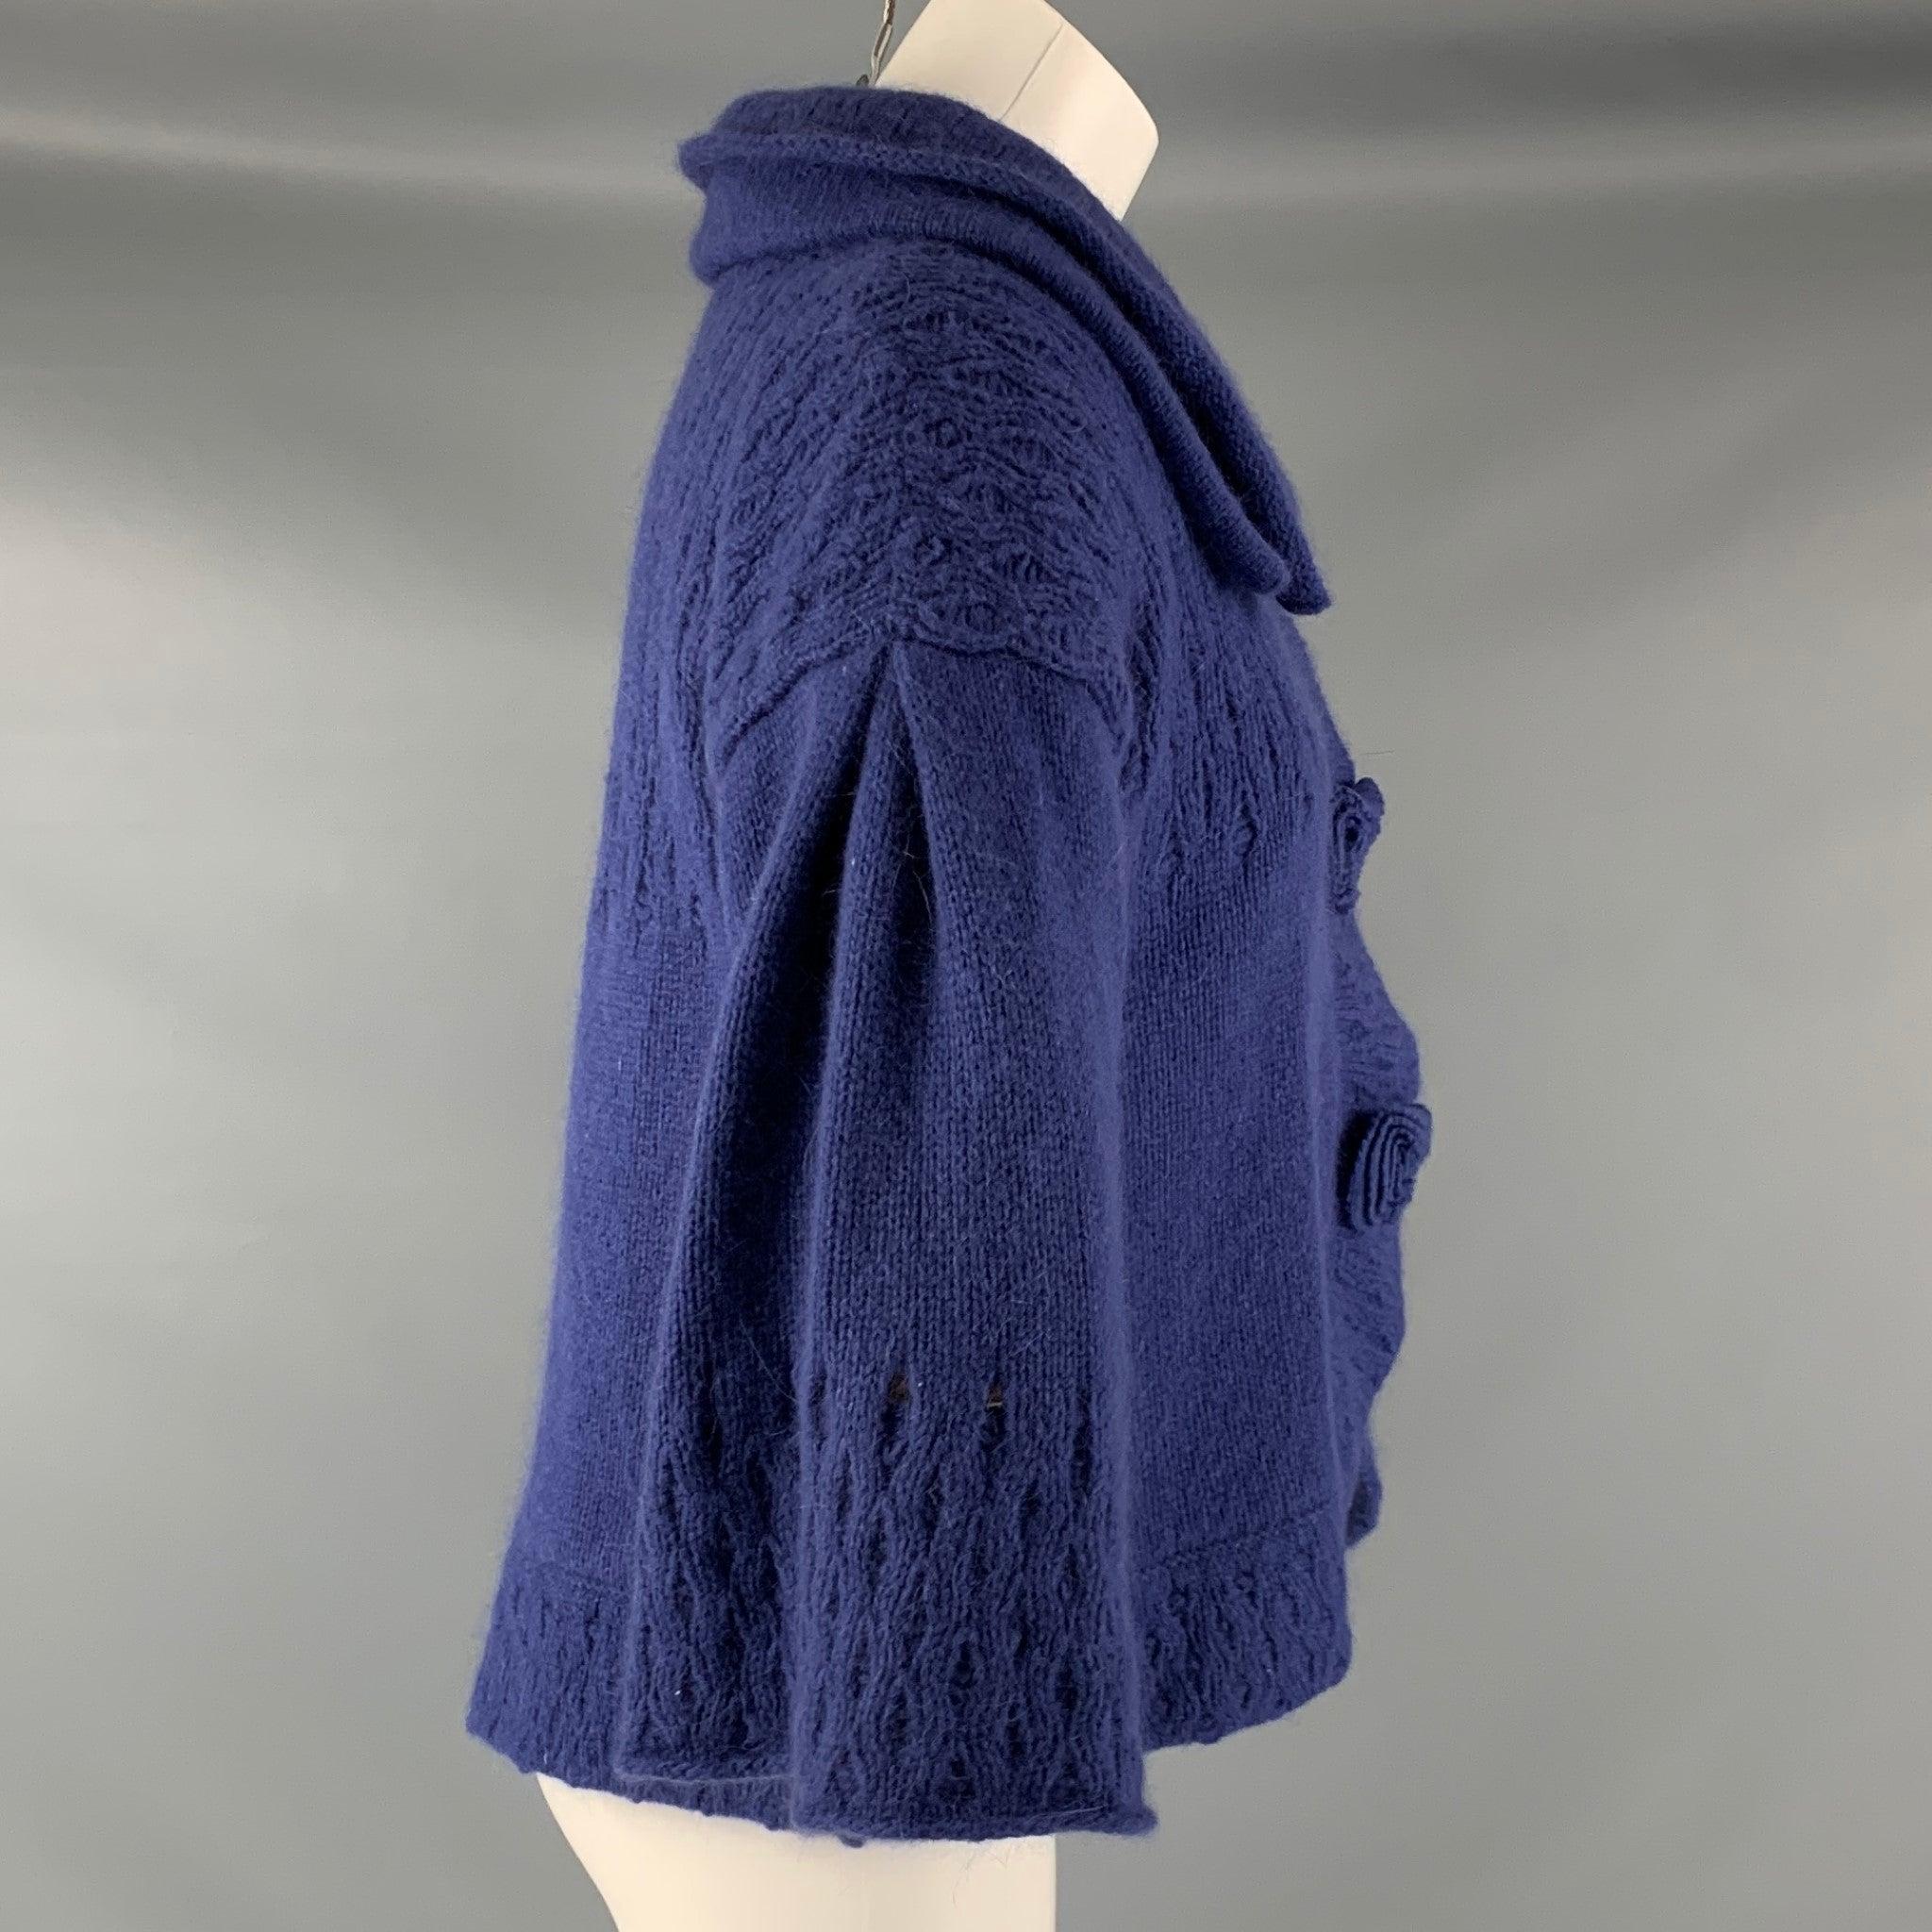 MARC JACOBS jacket comes in a blue lambswool and Angora Knit featuring a heather grey lining, A-line style, large lapel, 3/4 sleeves, and a snap button closure. Very Good Pre-Owned Condition. Minor signs of wear. 

Marked:   S 

Measurements: 
